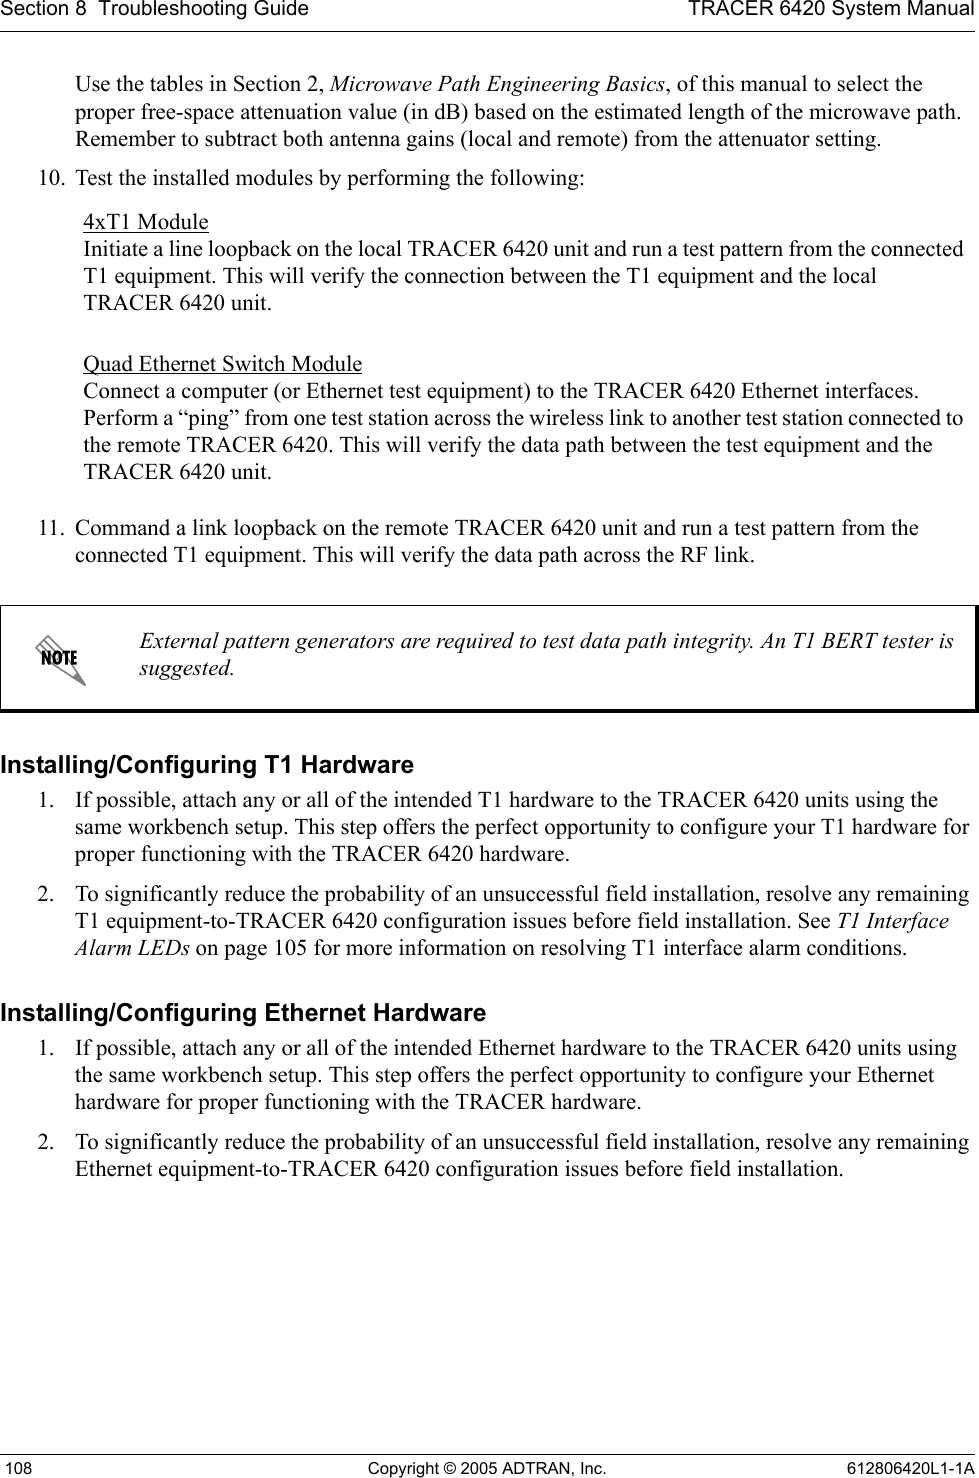 Section 8  Troubleshooting Guide TRACER 6420 System Manual 108 Copyright © 2005 ADTRAN, Inc. 612806420L1-1AUse the tables in Section 2, Microwave Path Engineering Basics, of this manual to select the proper free-space attenuation value (in dB) based on the estimated length of the microwave path. Remember to subtract both antenna gains (local and remote) from the attenuator setting.10. Test the installed modules by performing the following: 11. Command a link loopback on the remote TRACER 6420 unit and run a test pattern from the connected T1 equipment. This will verify the data path across the RF link. Installing/Configuring T1 Hardware1. If possible, attach any or all of the intended T1 hardware to the TRACER 6420 units using the same workbench setup. This step offers the perfect opportunity to configure your T1 hardware for proper functioning with the TRACER 6420 hardware.2. To significantly reduce the probability of an unsuccessful field installation, resolve any remaining T1 equipment-to-TRACER 6420 configuration issues before field installation. See T1 Interface Alarm LEDs on page 105 for more information on resolving T1 interface alarm conditions.Installing/Configuring Ethernet Hardware1. If possible, attach any or all of the intended Ethernet hardware to the TRACER 6420 units using the same workbench setup. This step offers the perfect opportunity to configure your Ethernet hardware for proper functioning with the TRACER hardware.2. To significantly reduce the probability of an unsuccessful field installation, resolve any remaining Ethernet equipment-to-TRACER 6420 configuration issues before field installation.4xT1 Module Initiate a line loopback on the local TRACER 6420 unit and run a test pattern from the connected T1 equipment. This will verify the connection between the T1 equipment and the local TRACER 6420 unit.Quad Ethernet Switch Module Connect a computer (or Ethernet test equipment) to the TRACER 6420 Ethernet interfaces. Perform a “ping” from one test station across the wireless link to another test station connected to the remote TRACER 6420. This will verify the data path between the test equipment and the TRACER 6420 unit.External pattern generators are required to test data path integrity. An T1 BERT tester is suggested.